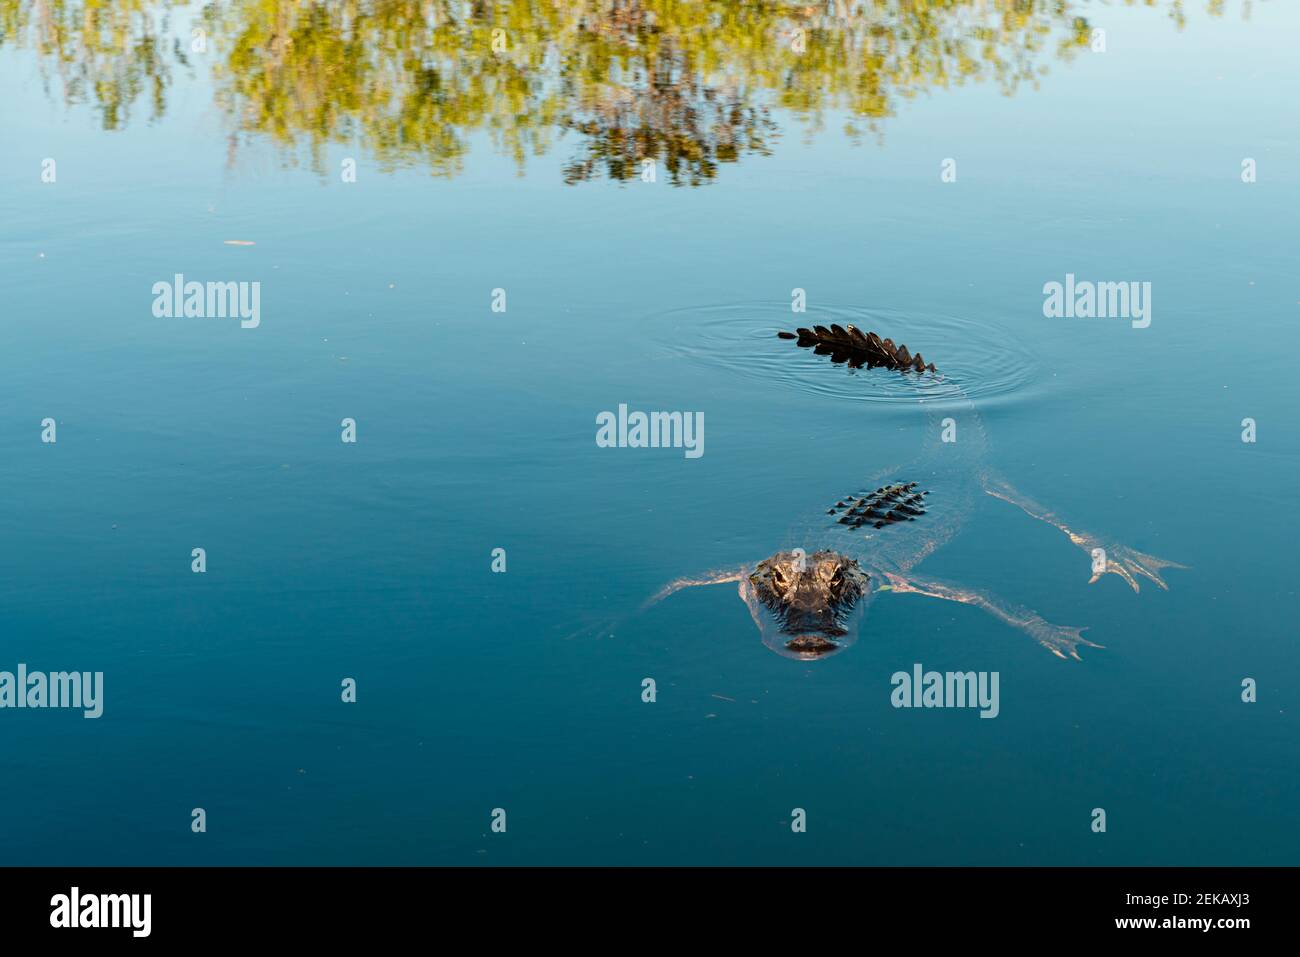 American alligator swimming in lake at Everglades National Park Stock Photo